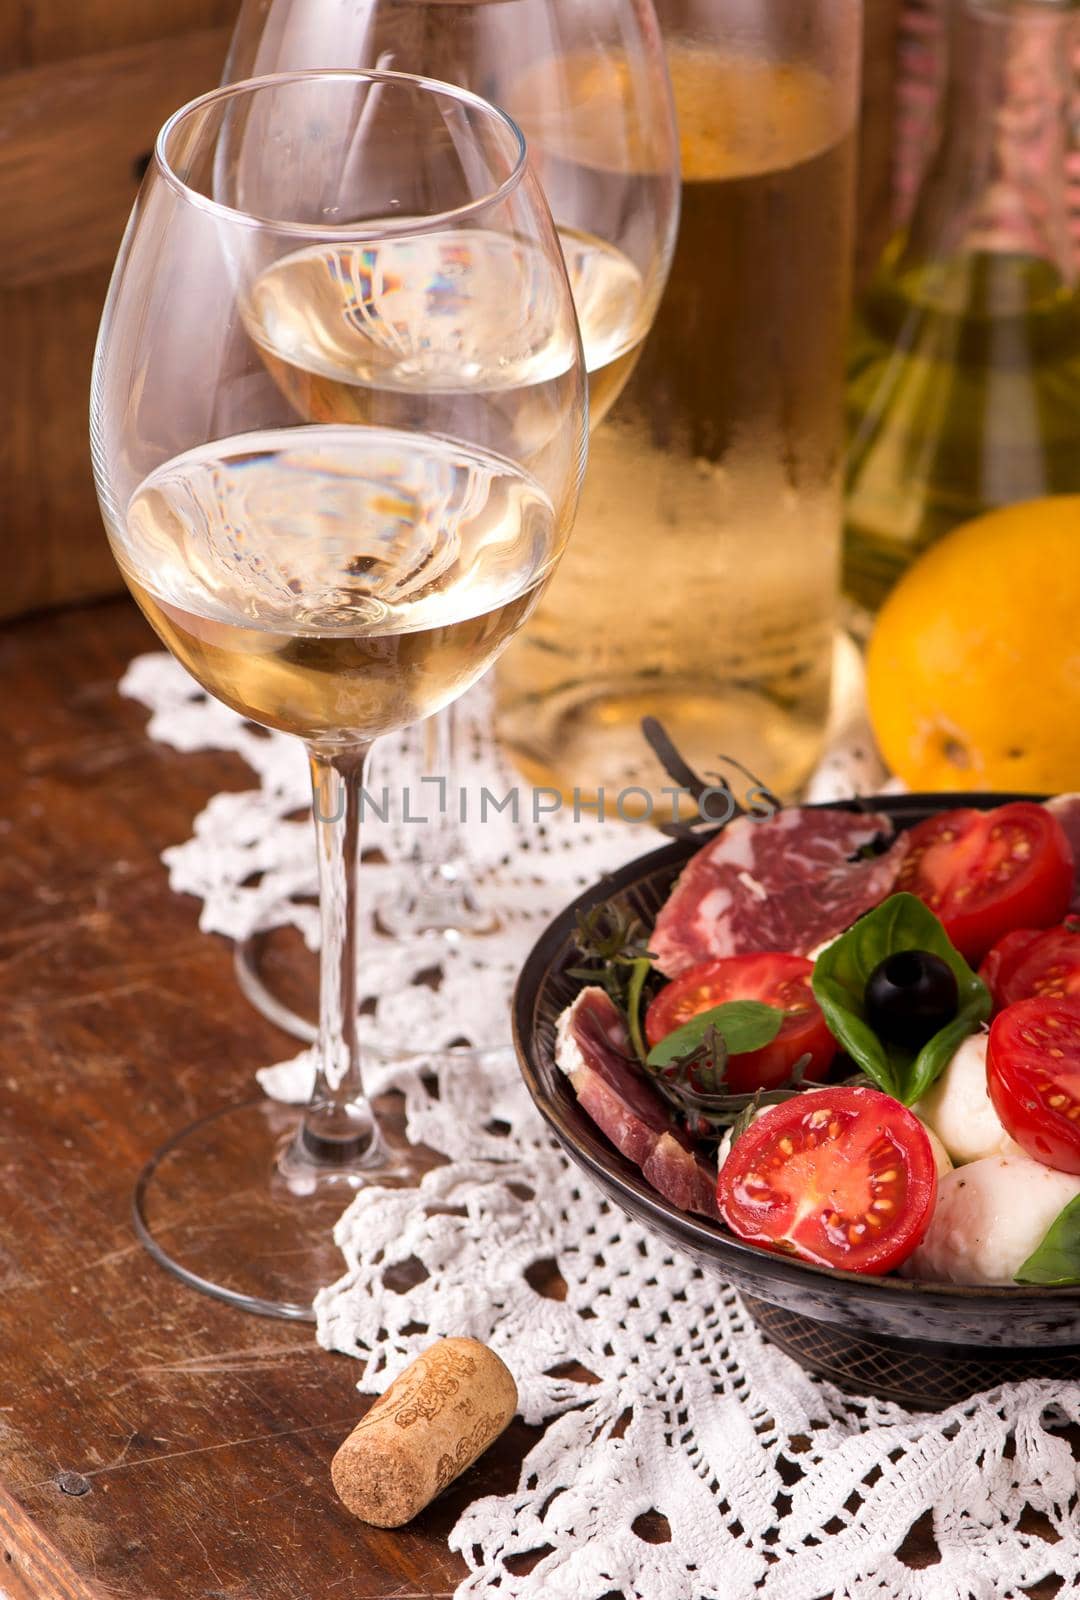 white wineand tomatoes with basil. Wine and tomatoes with basil in vintage setting on wooden table by aprilphoto